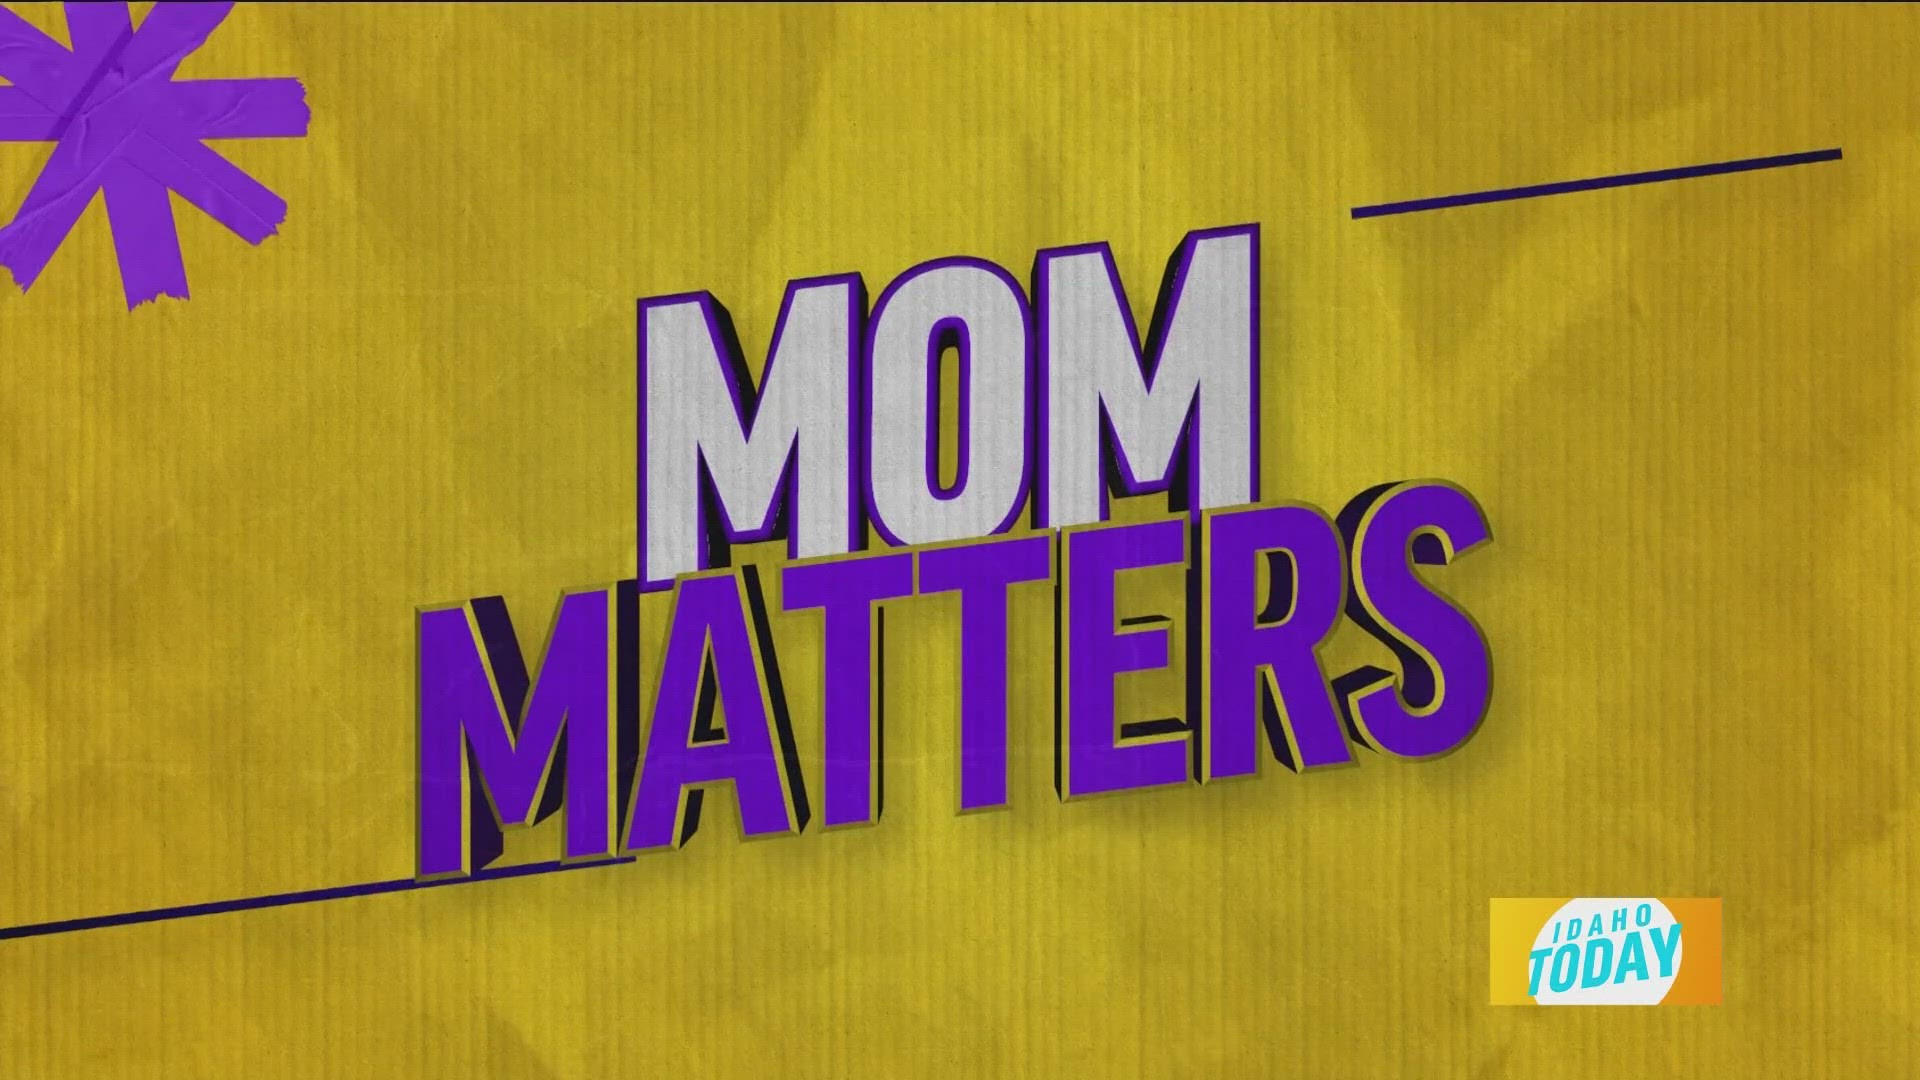 Mom Matters on Idaho Today is a new series created by moms for moms as a safe place to share, collaborate and support one another.